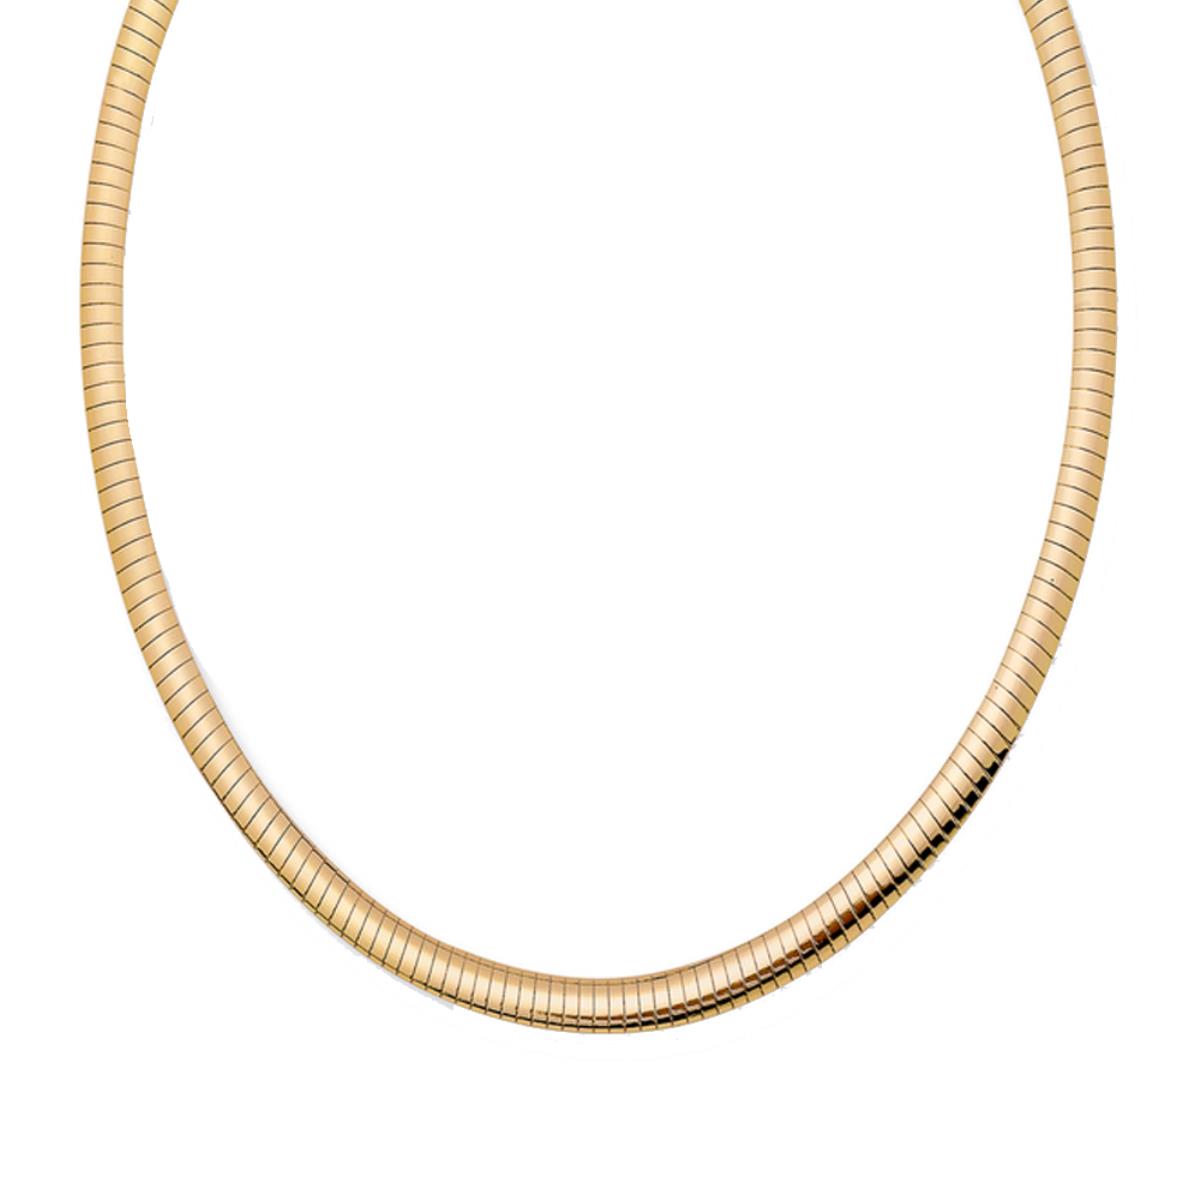 10k Yellow Gold 4mm Omega Chain 